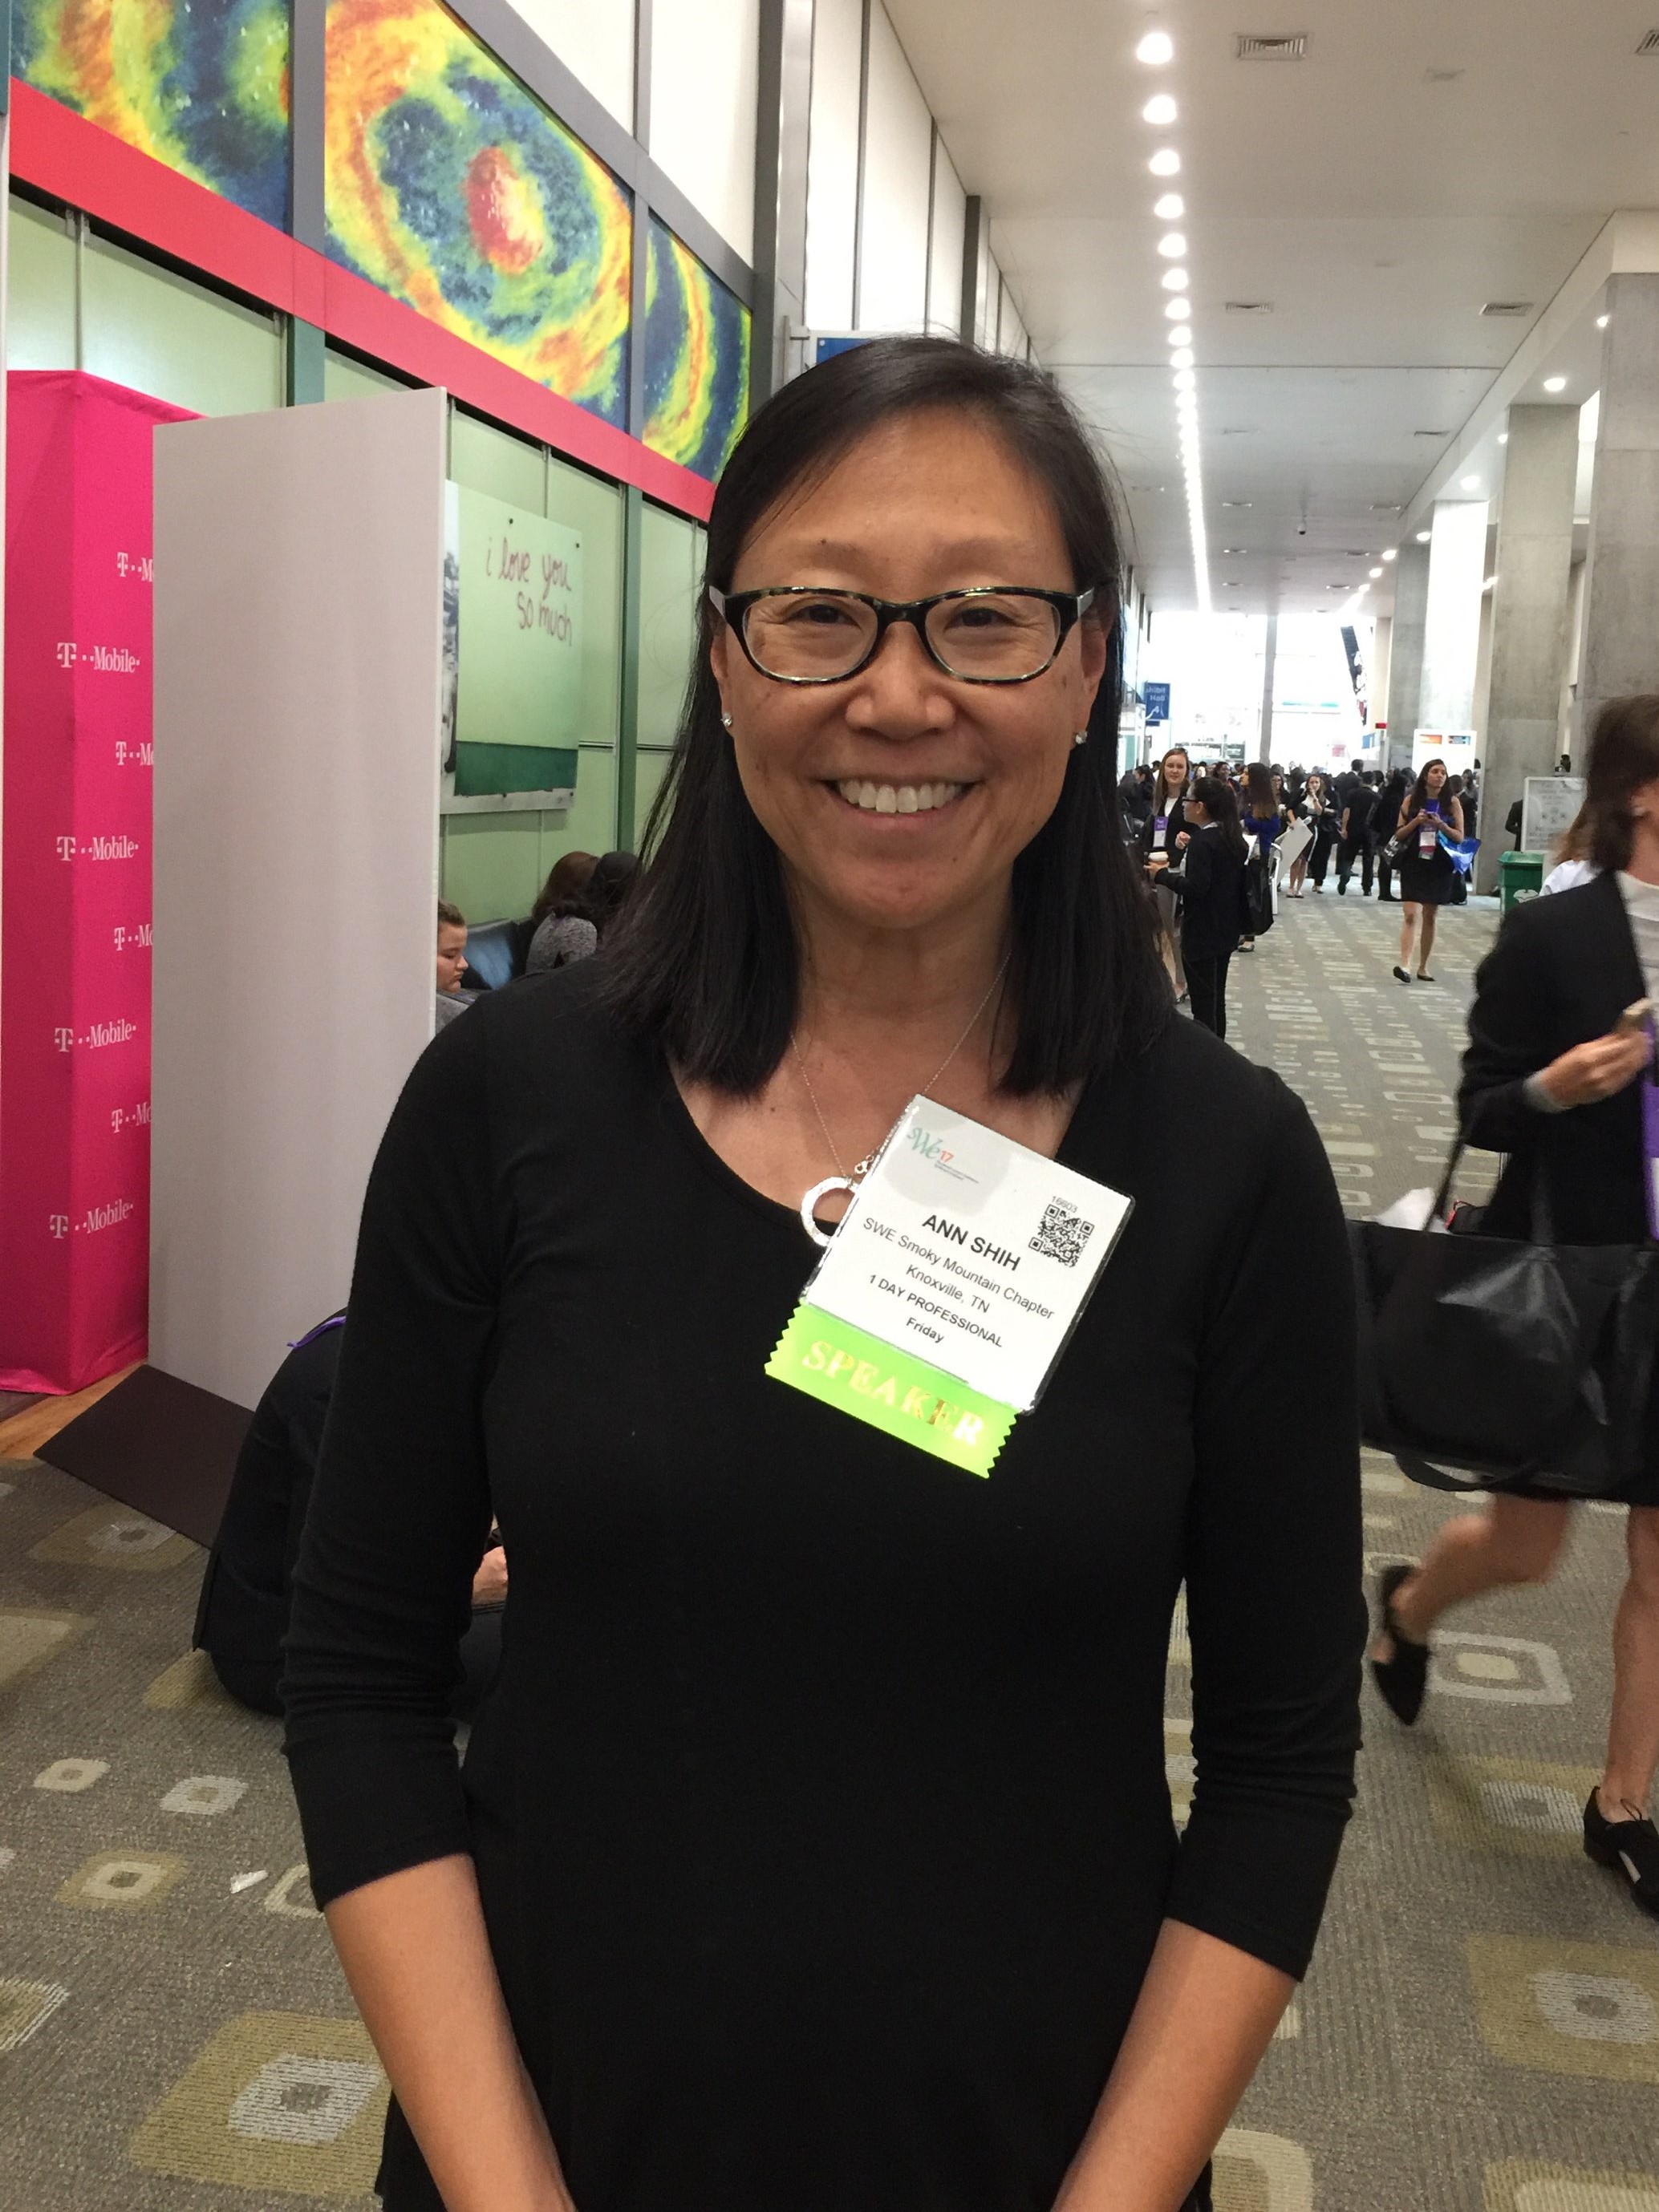 Y-12 process engineer and Society of Women Engineers member, Ann Shih, at the 2017 National SWE Conference where she was a speaker.